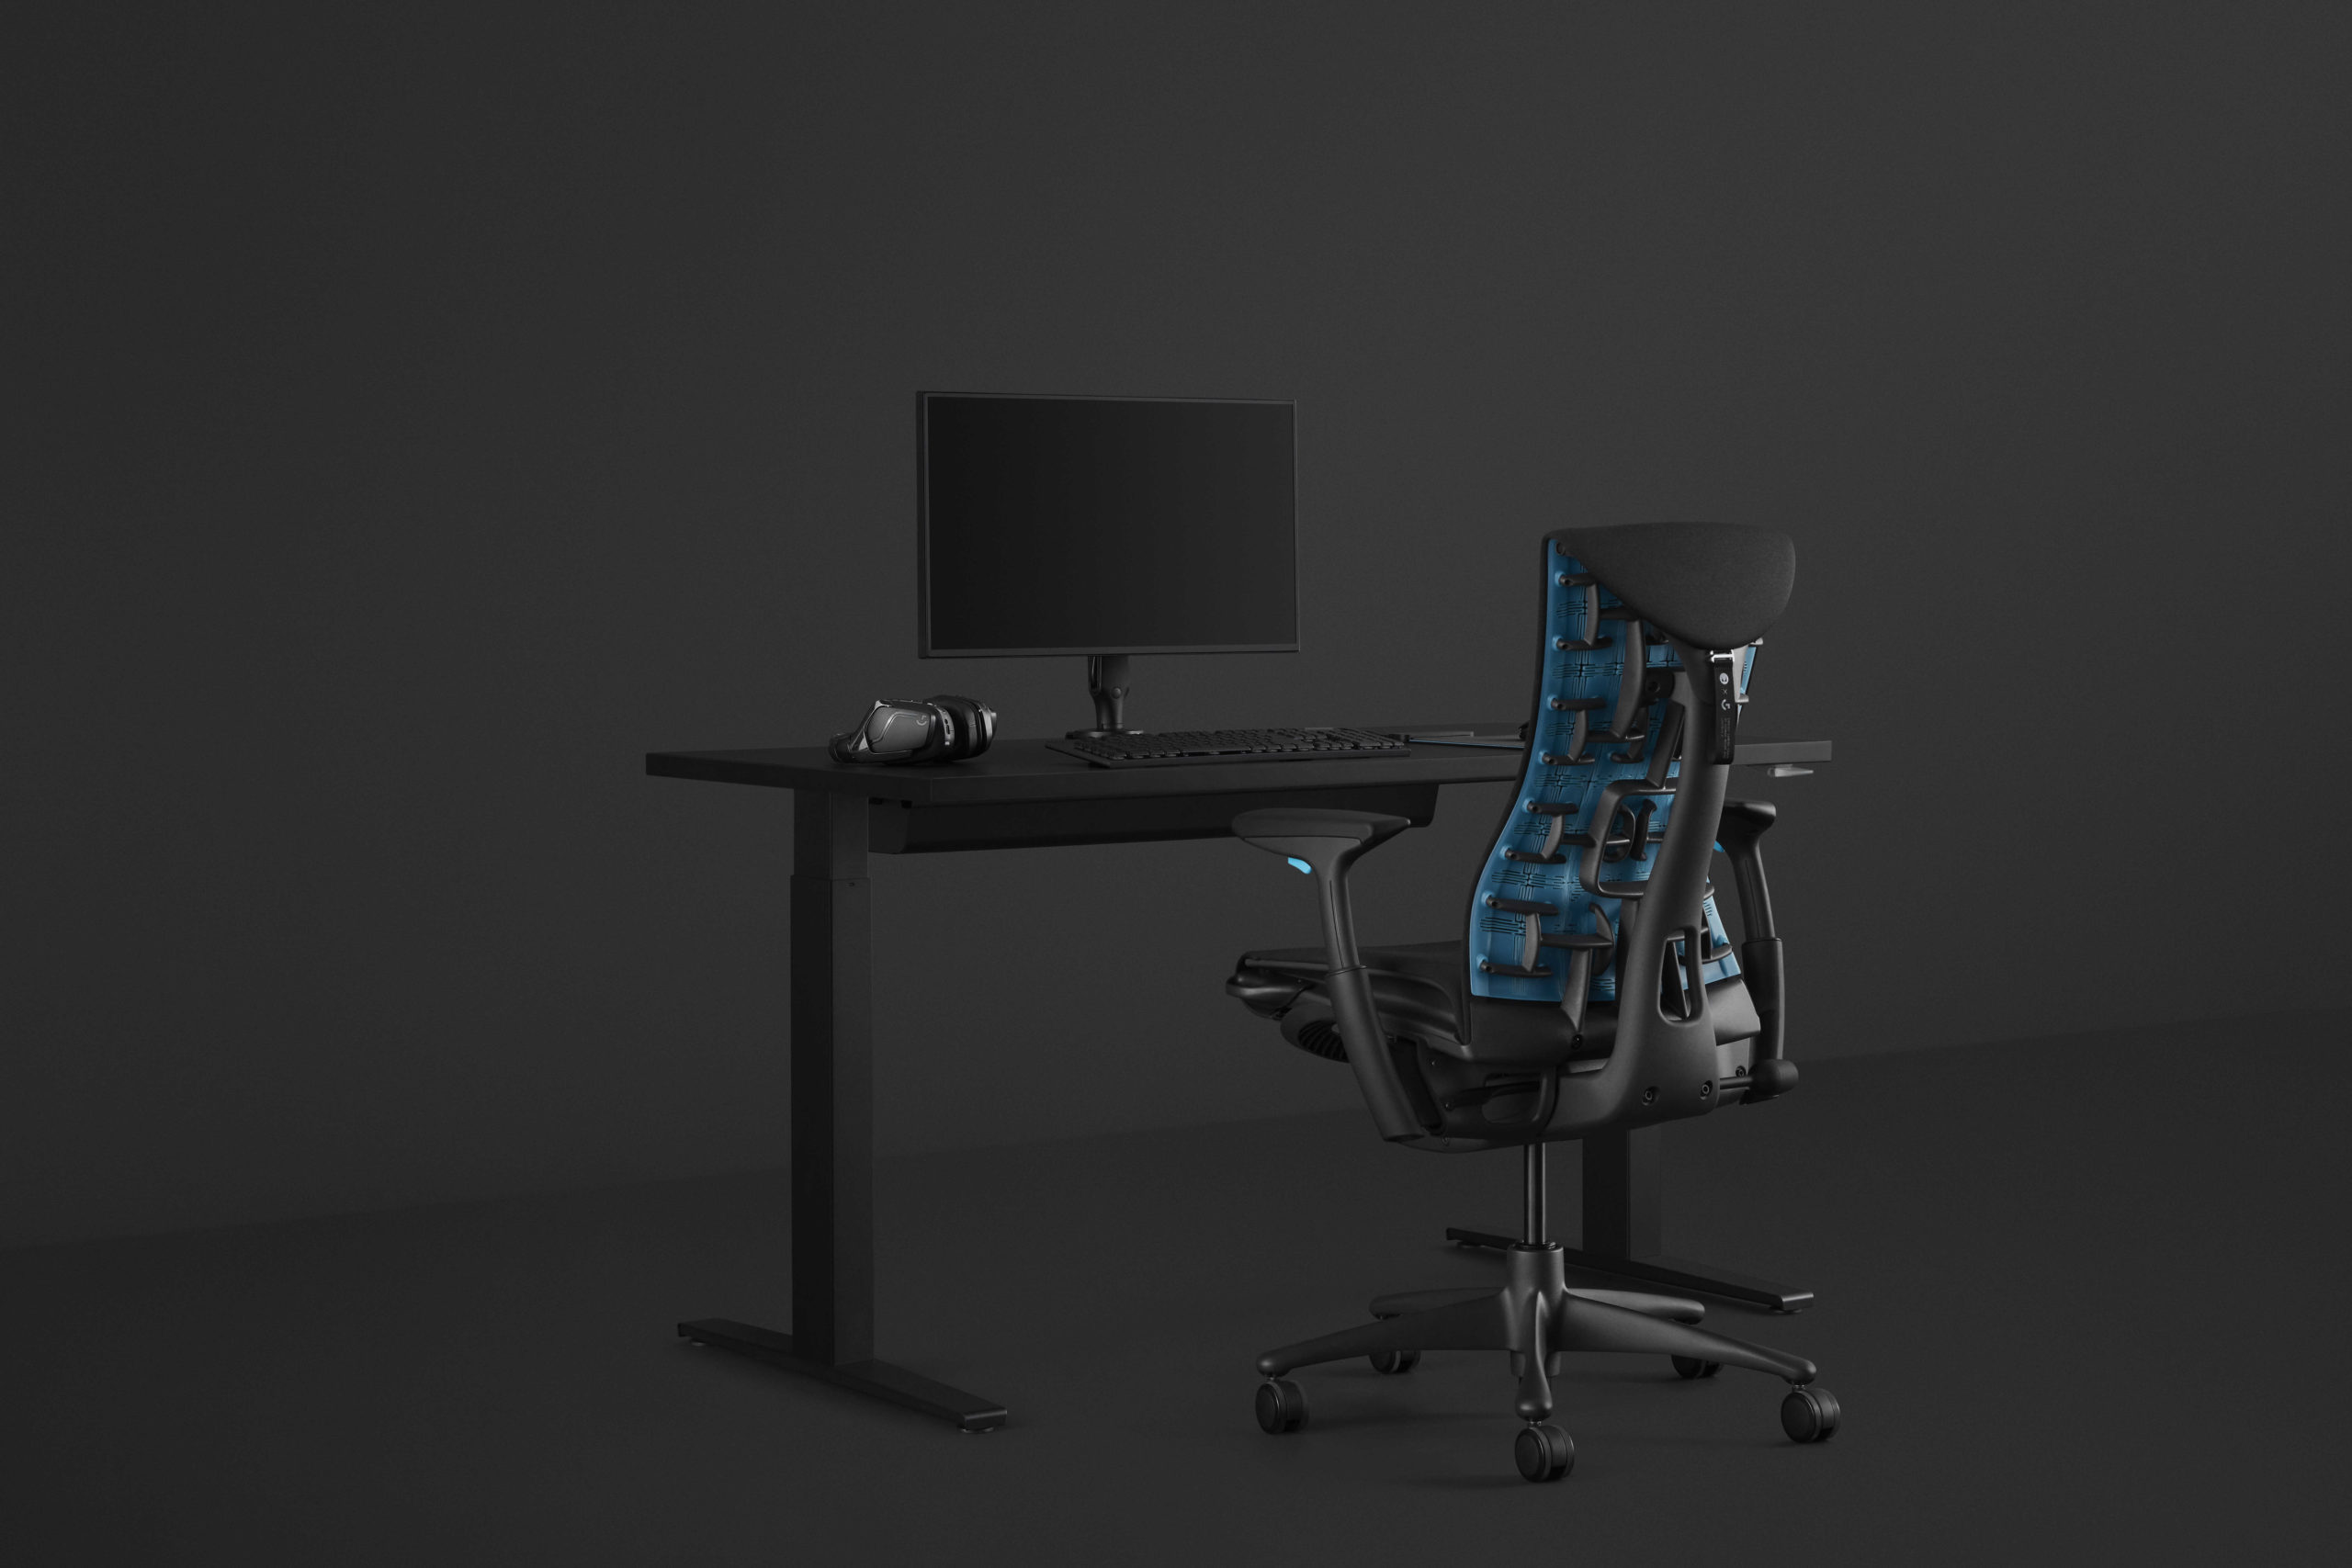 LOGITECH G AND HERMAN MILLER ENHANCE THE EMBODY CHAIR TO